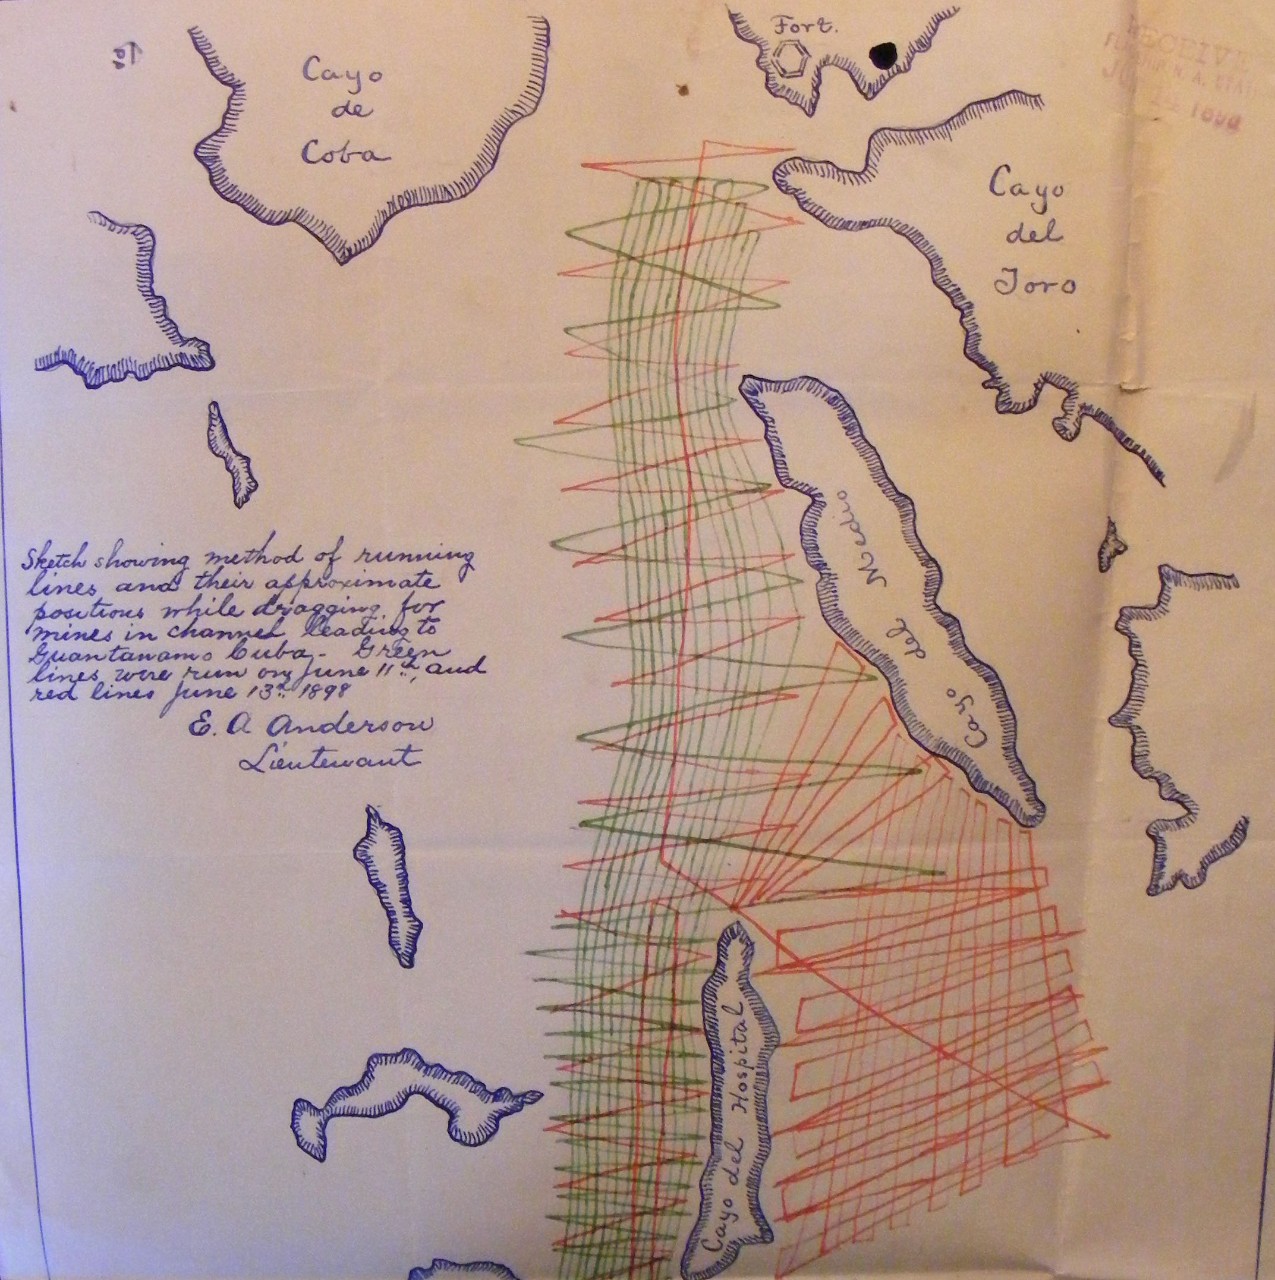 A contemporary drawing by hand of the minesweeping activity at Guantanamo.